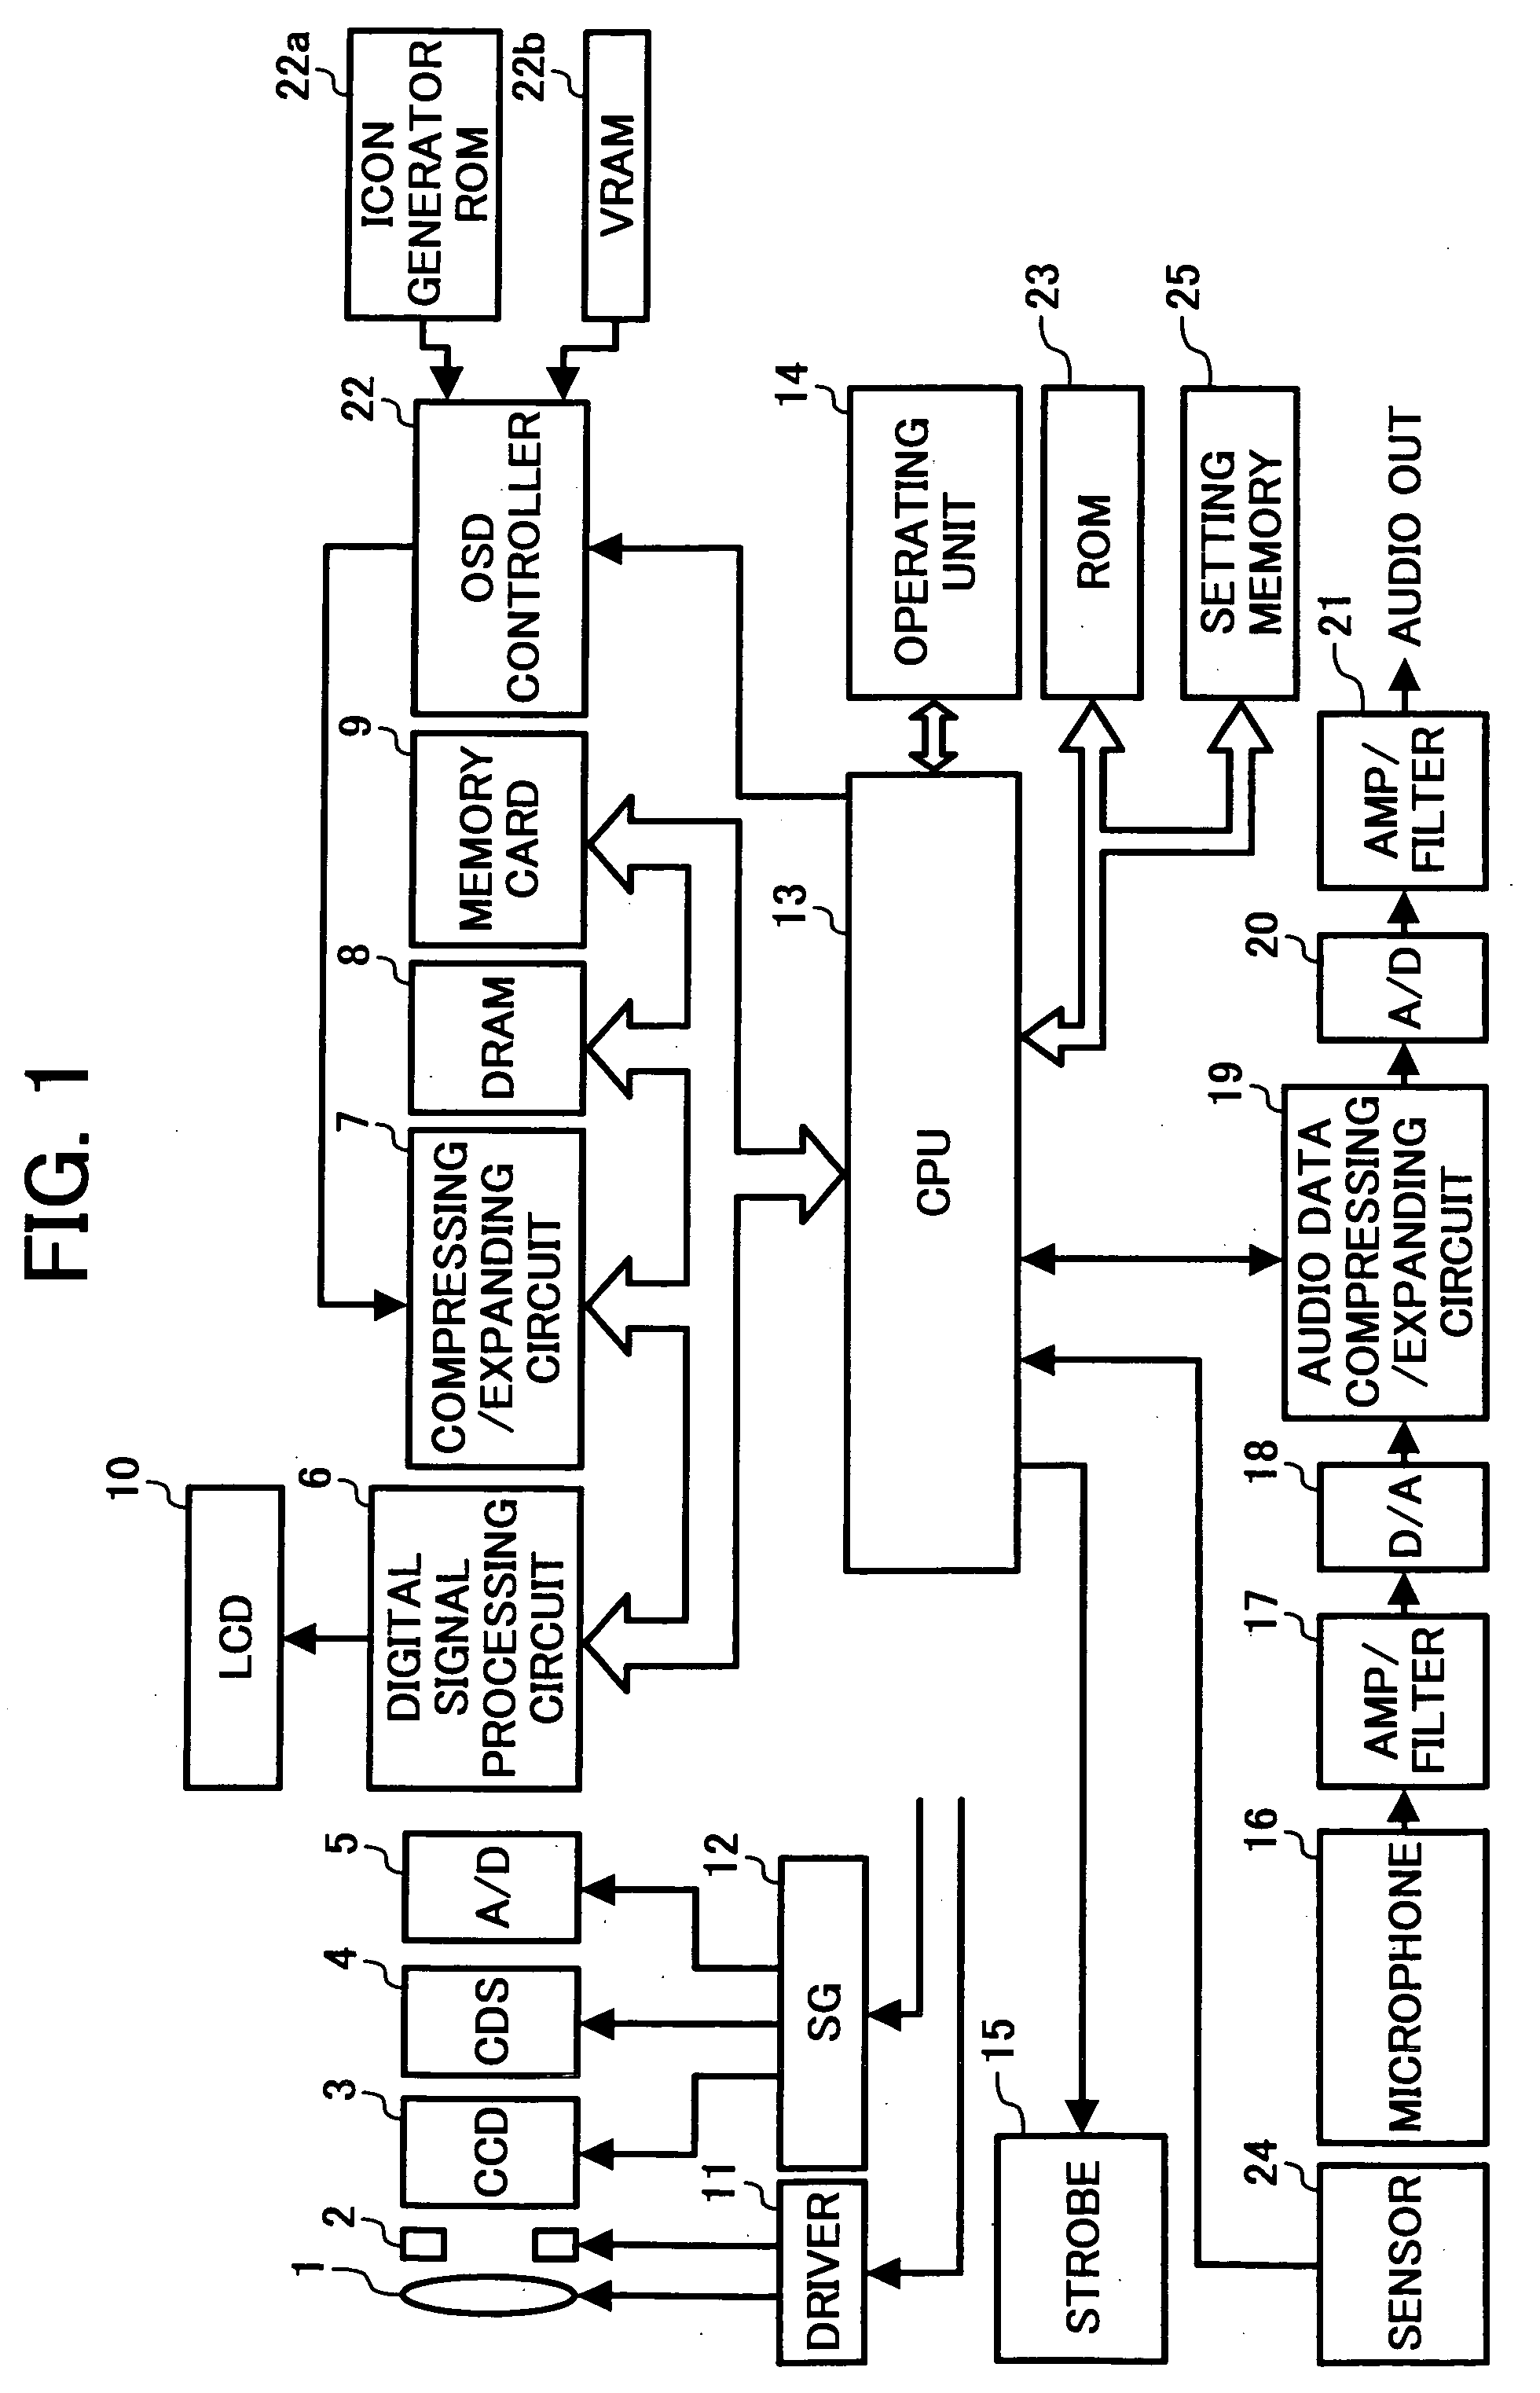 Electronic apparatus with display unit, information-processing method, and computer product